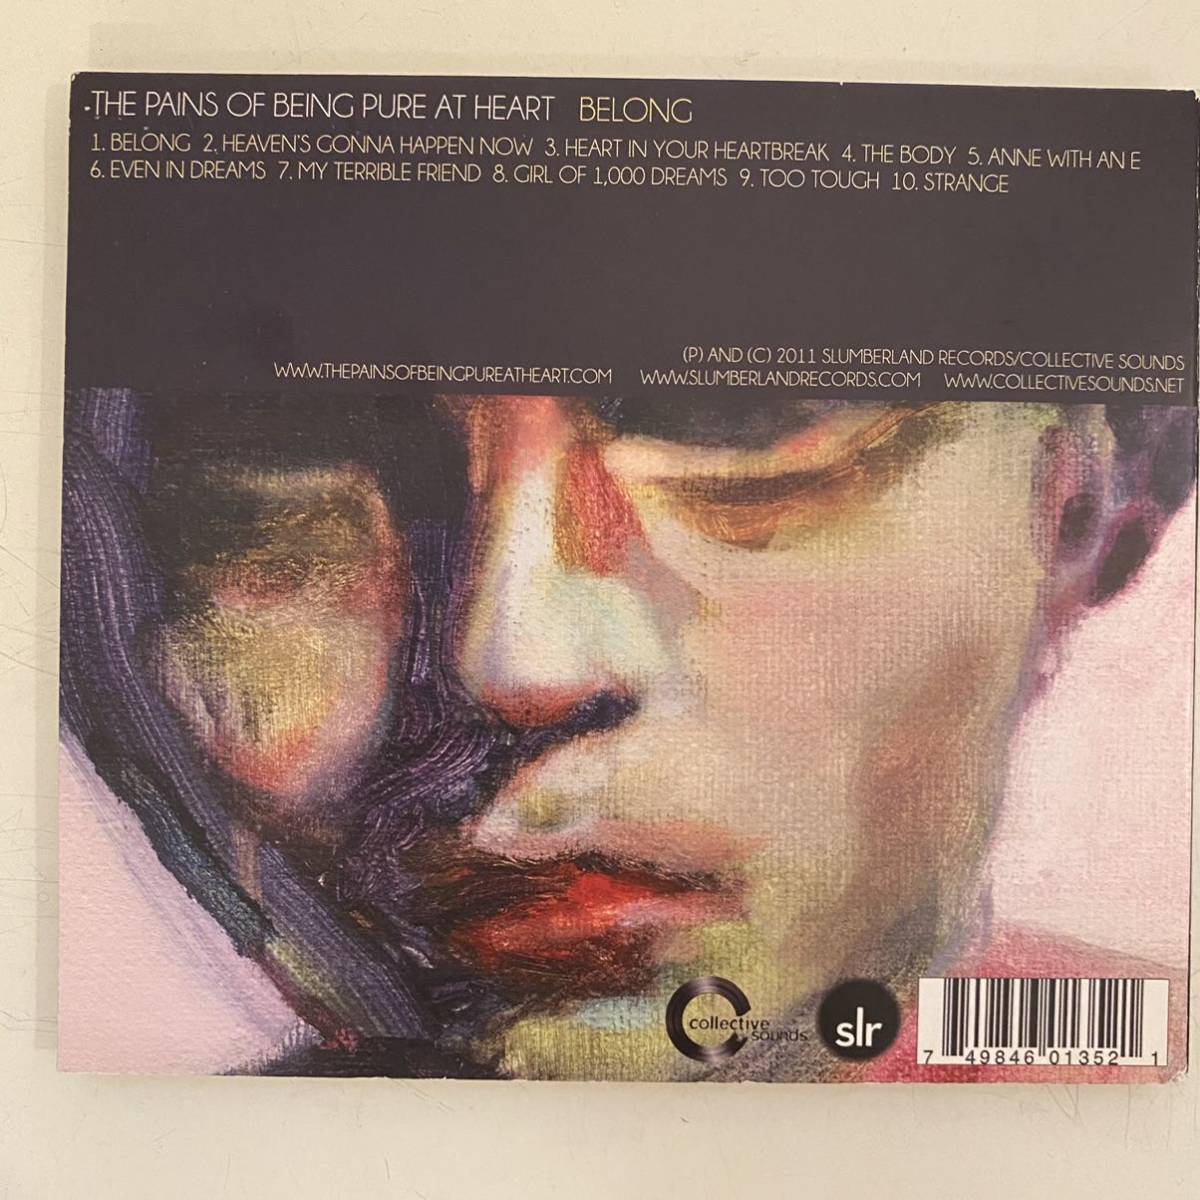 CD ★The Pains of Being Pure at Heart『Belong』中古 The pains of being pure at heart belong_画像2